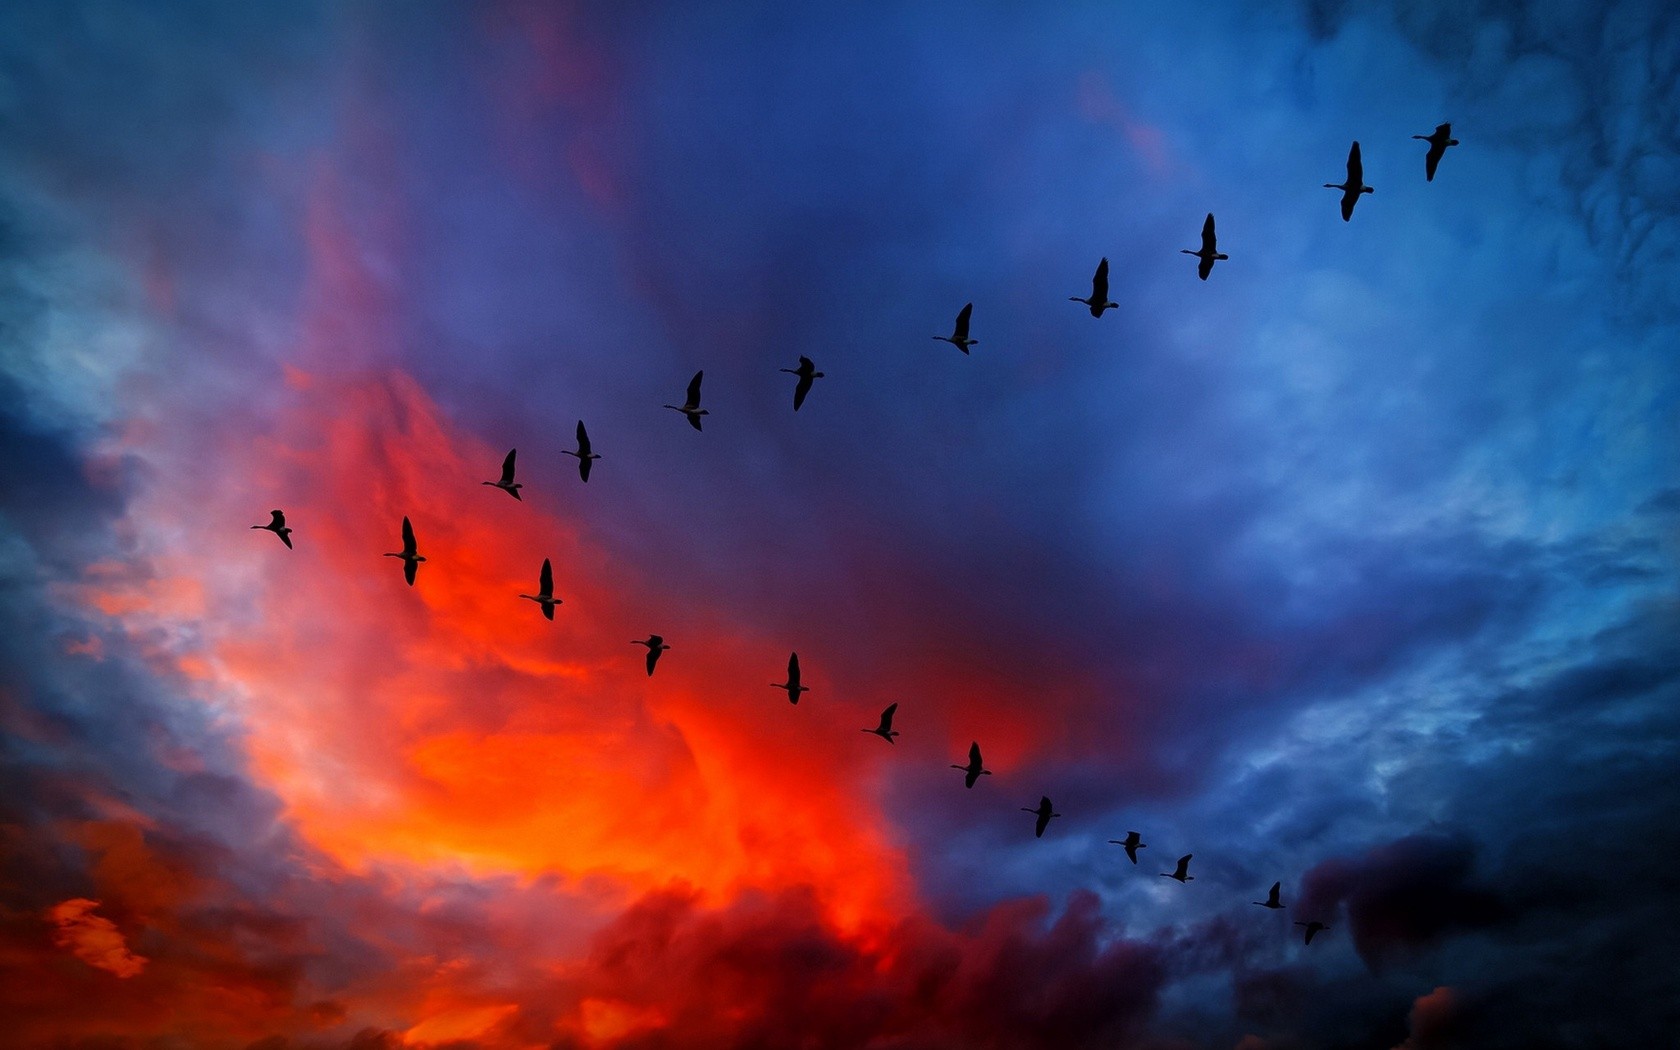 General 1680x1050 sky sunset birds geese animals clouds